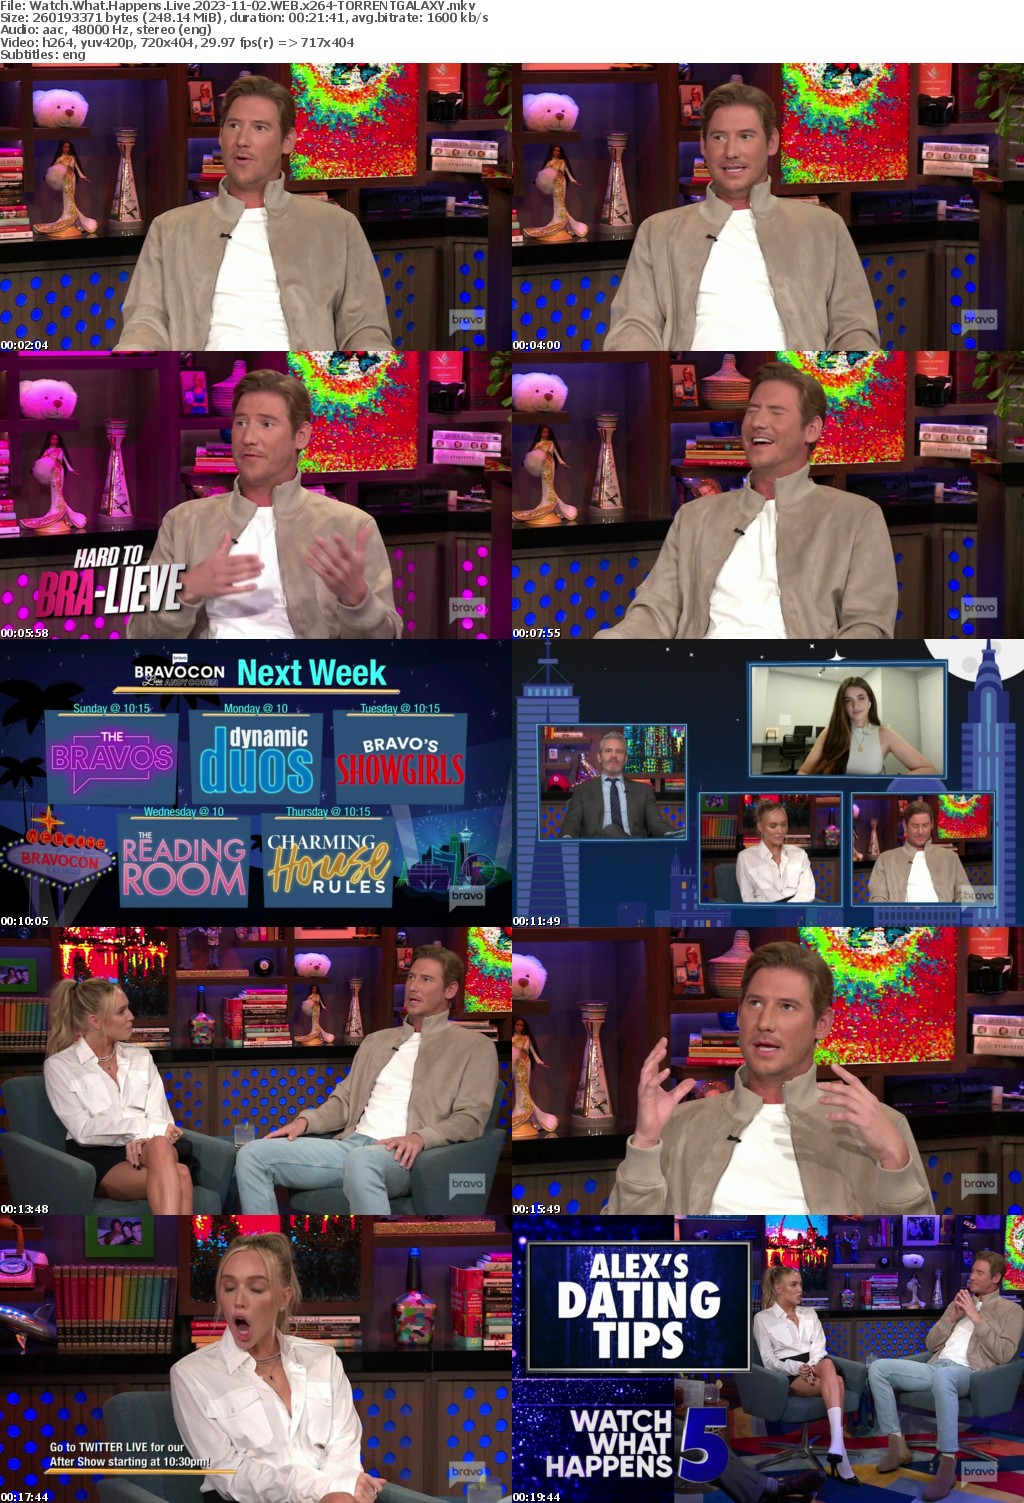 Watch What Happens Live 2023-11-02 WEB x264-GALAXY